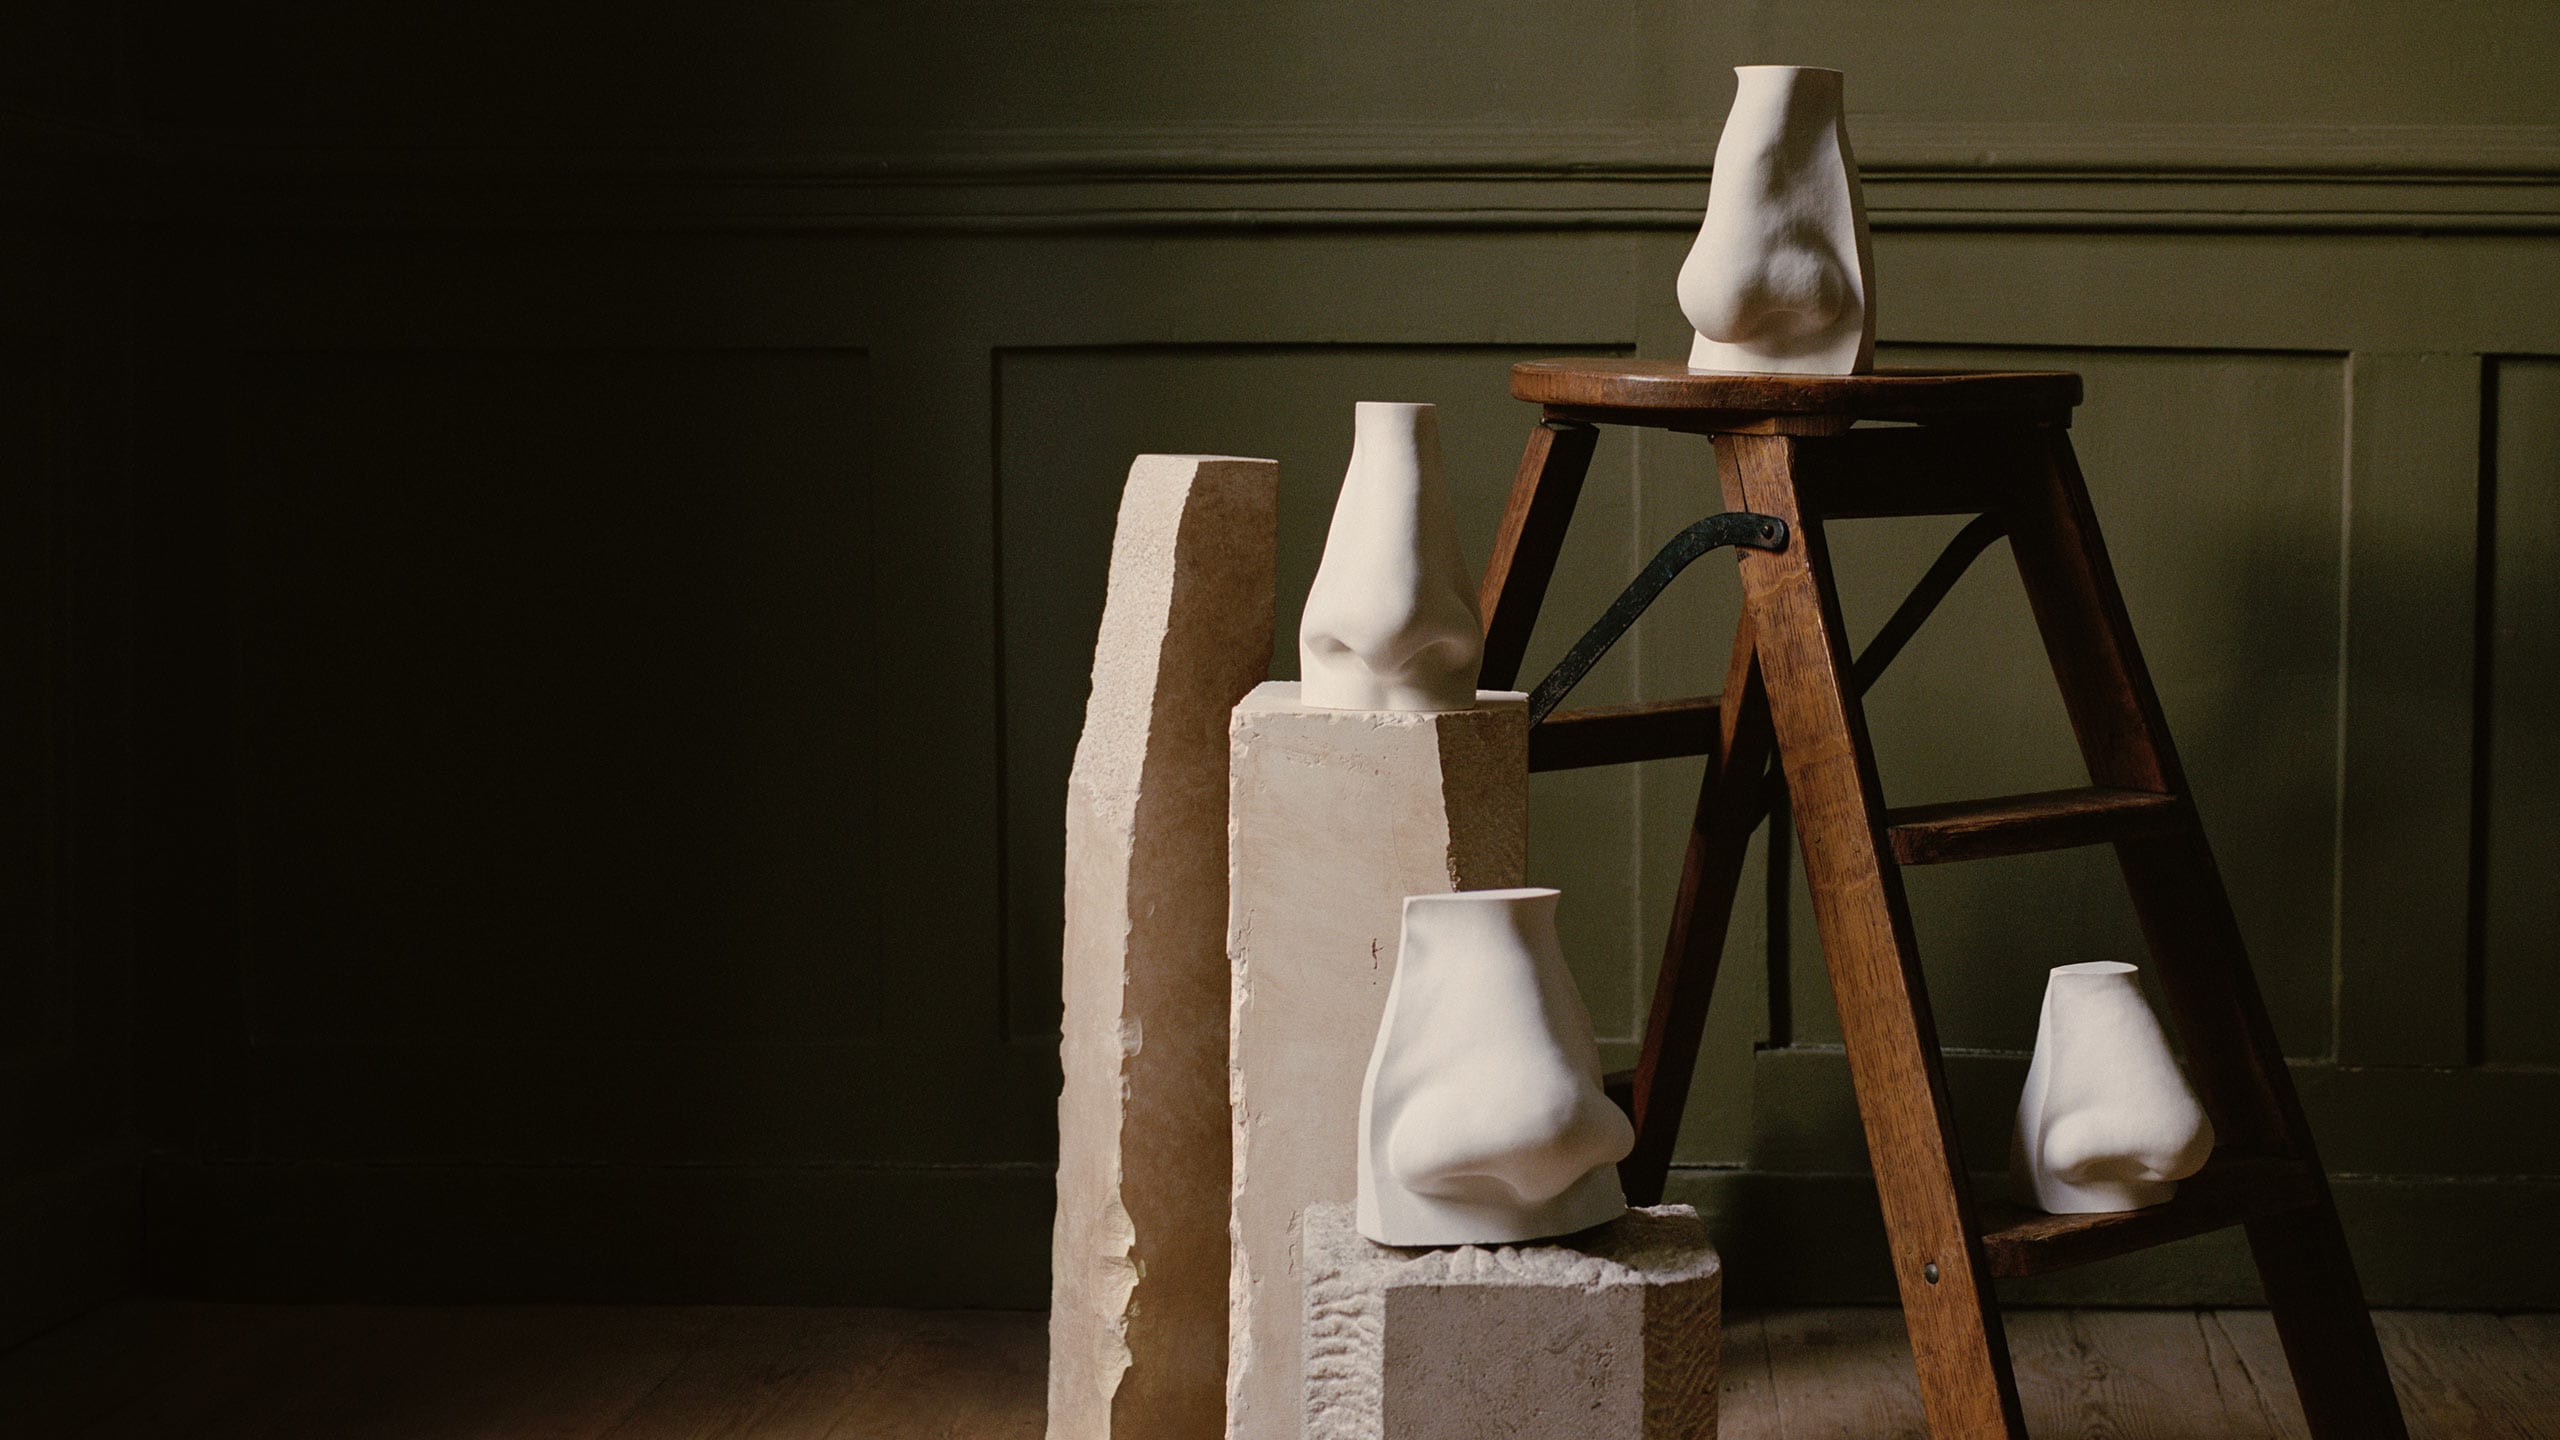 Nose sculptures placed on a wooden stool and marble stands